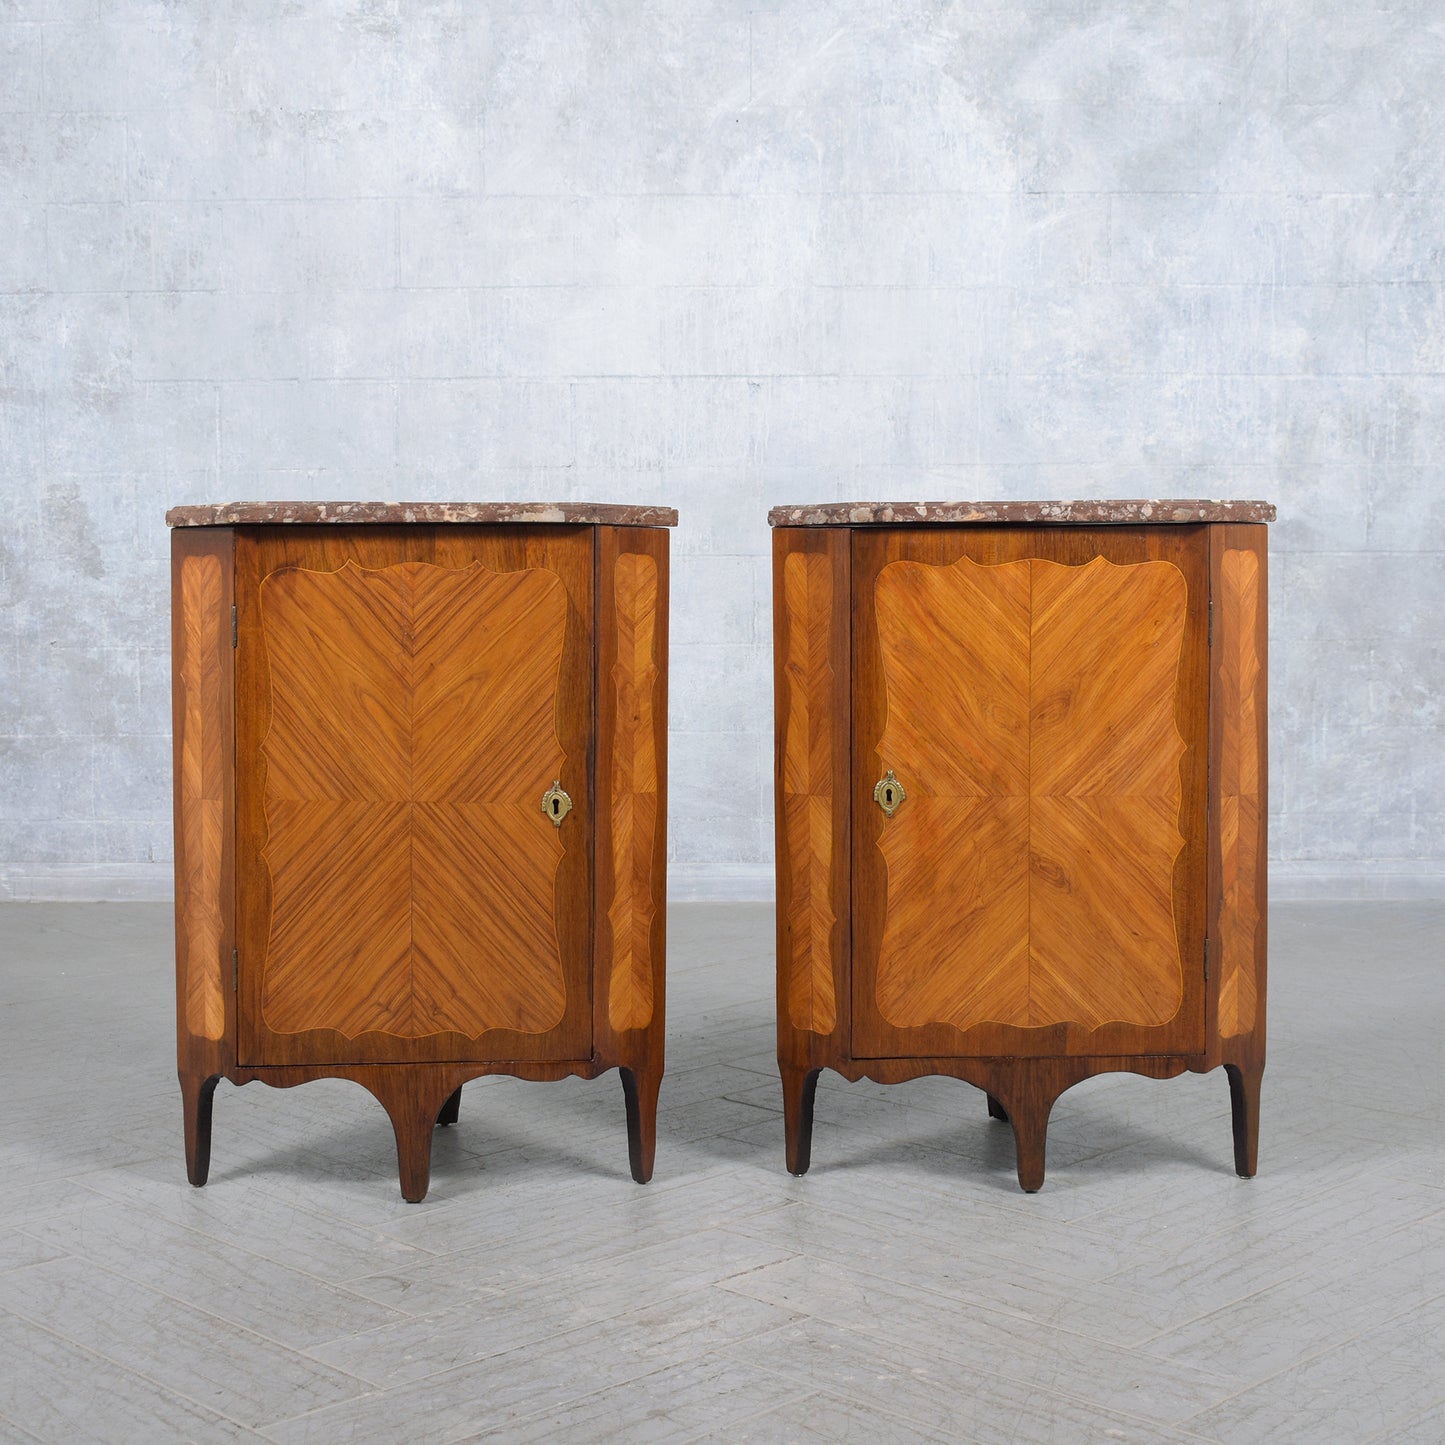 Late 18th-Century French Corner Cabinets with Marble Tops: Restored Elegance